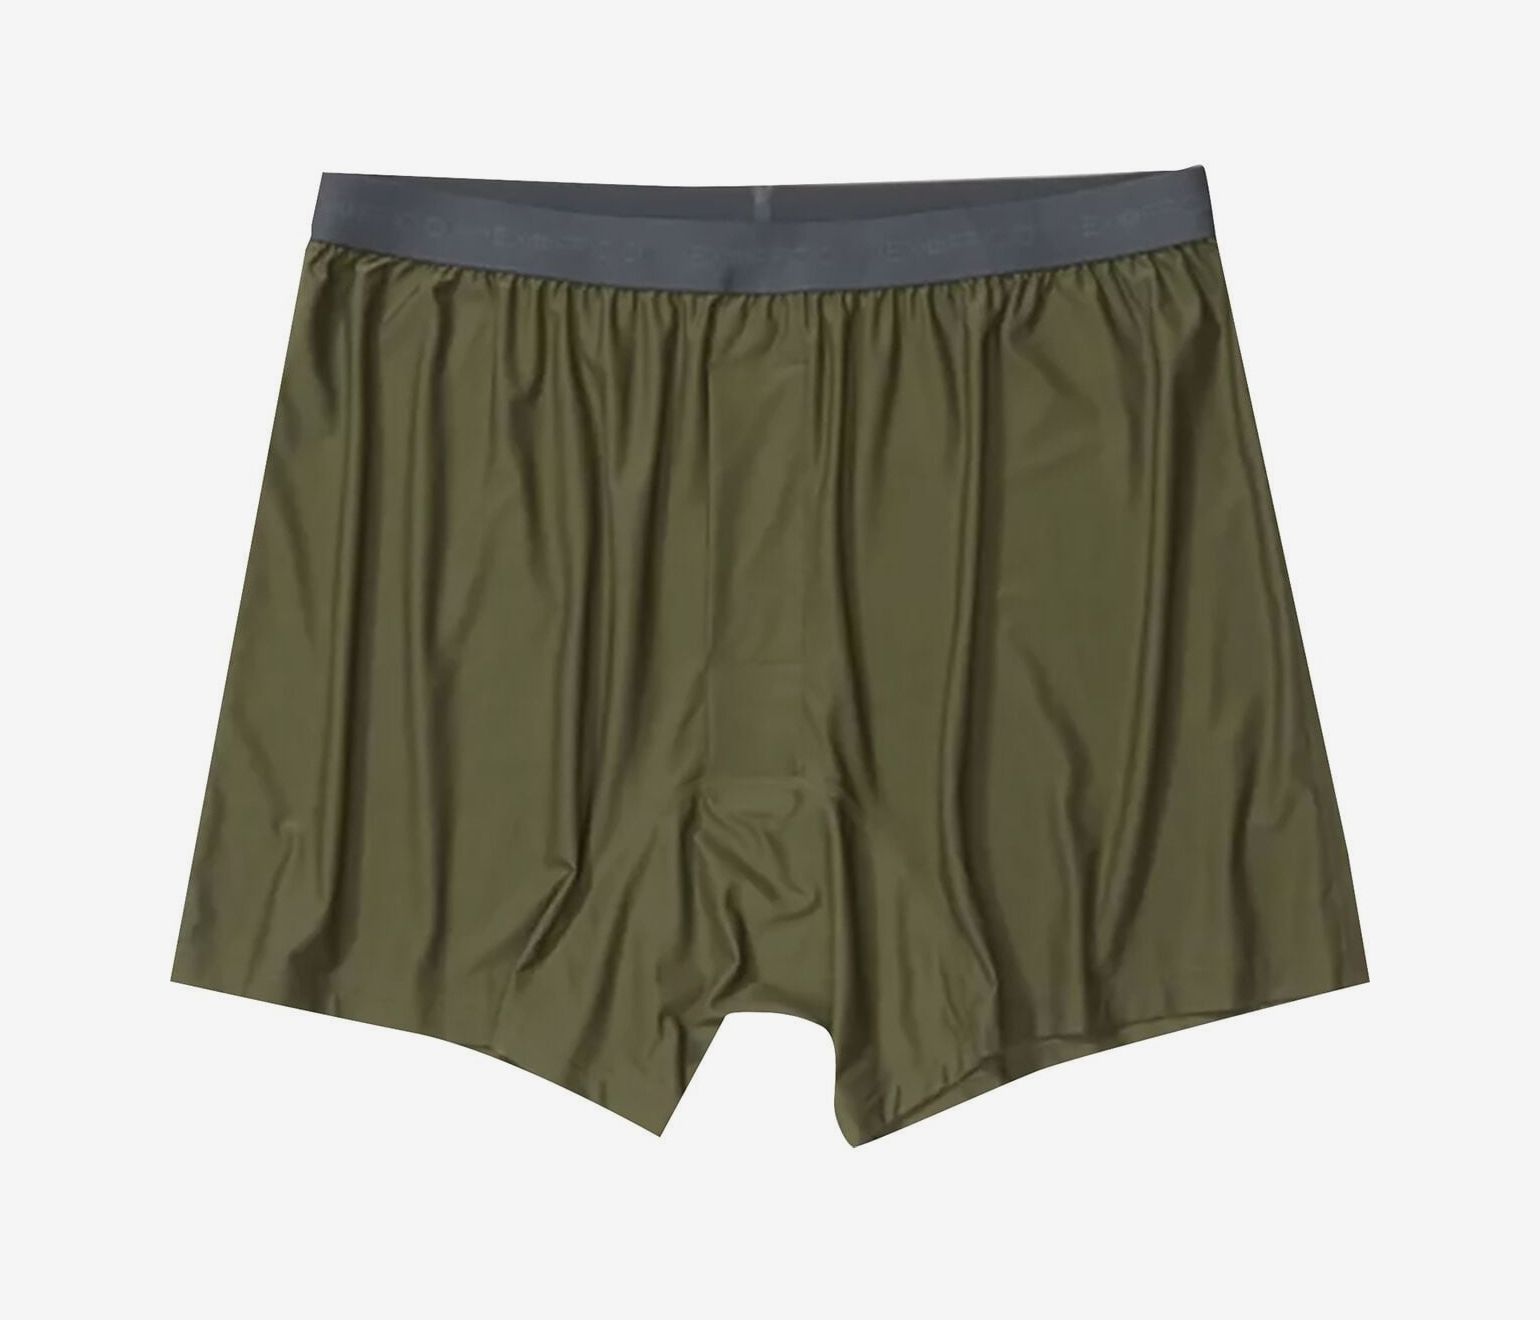 I'm An Underwear Expert, and the World's Best Underwear Is 30% Off Today -  Yahoo Sports